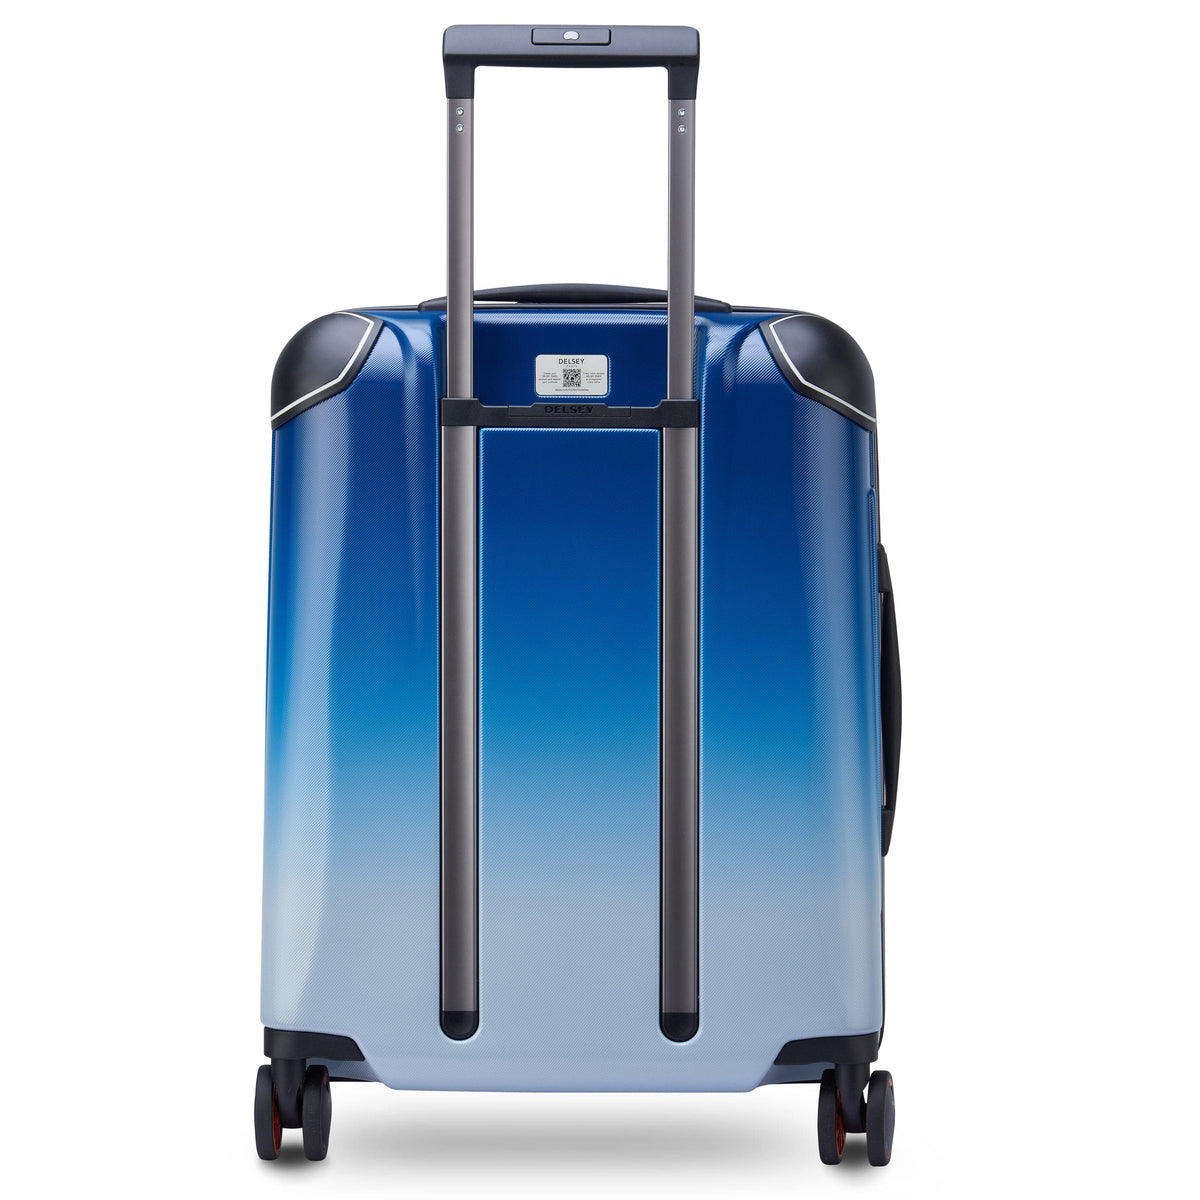 Delsey Cactus Carry-On Spinner Luggage - 20" Small